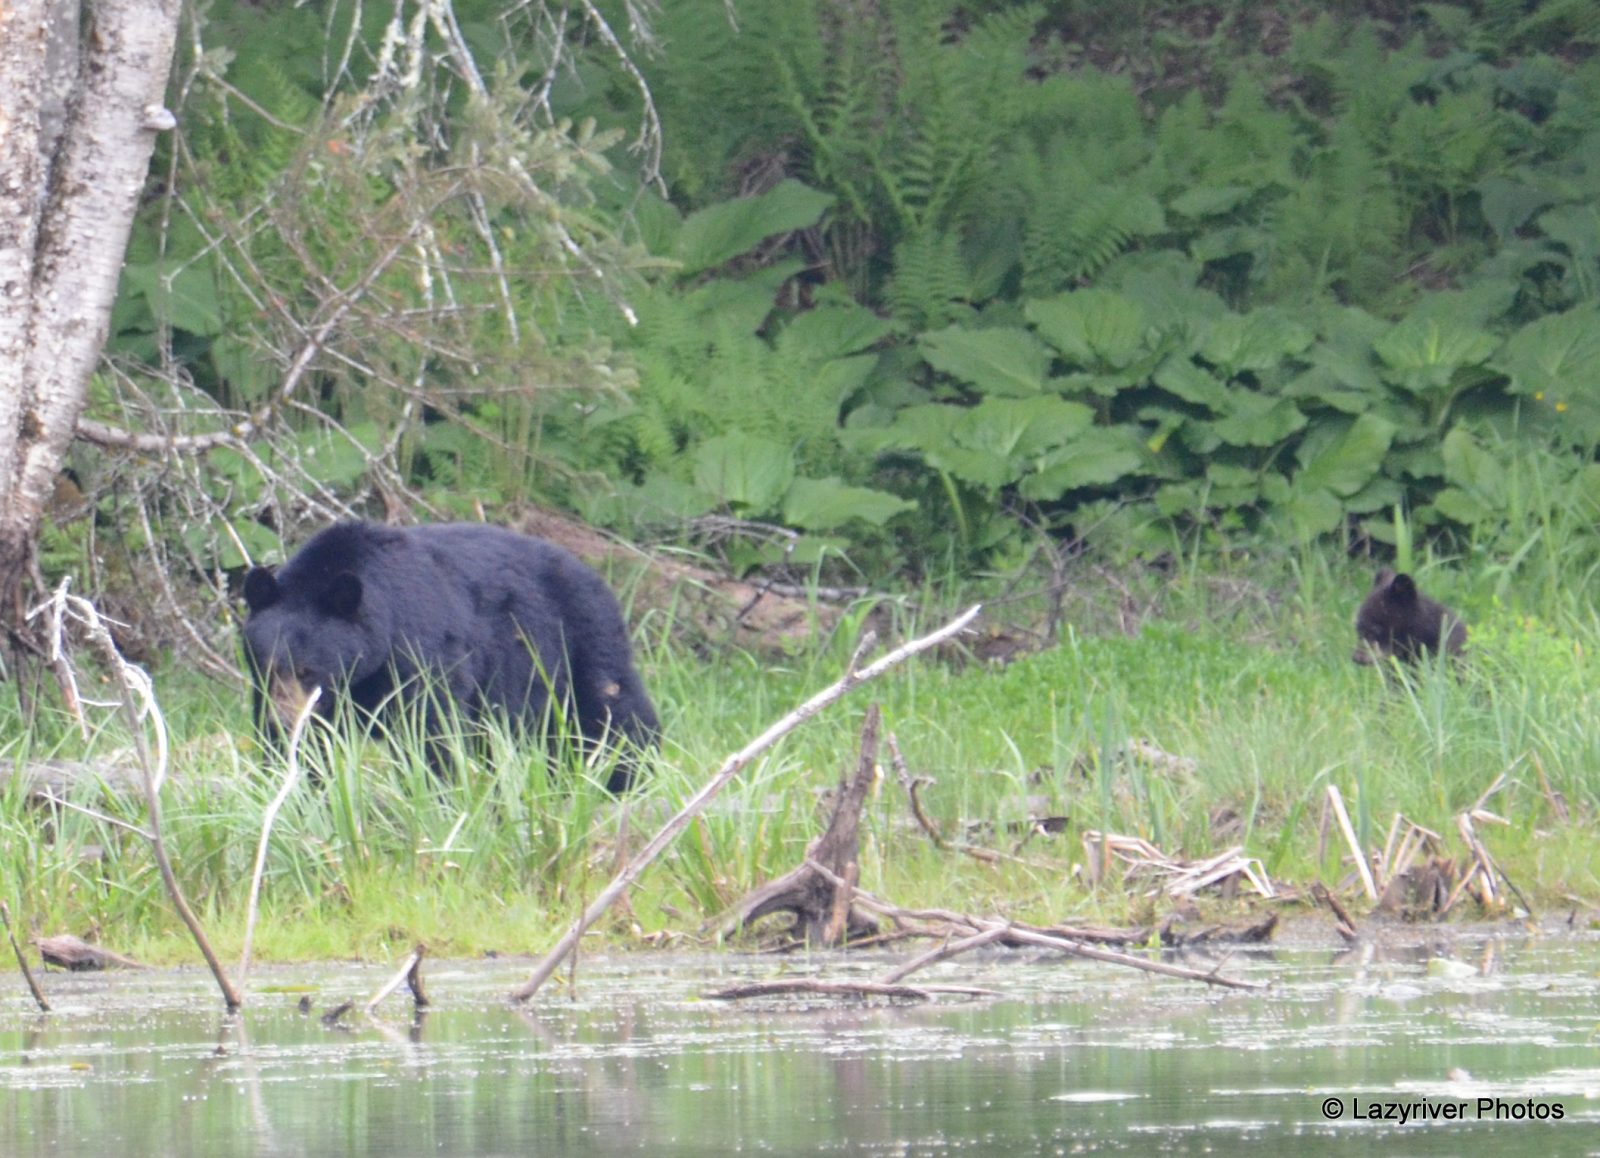 Bears on the Tomifobia trail